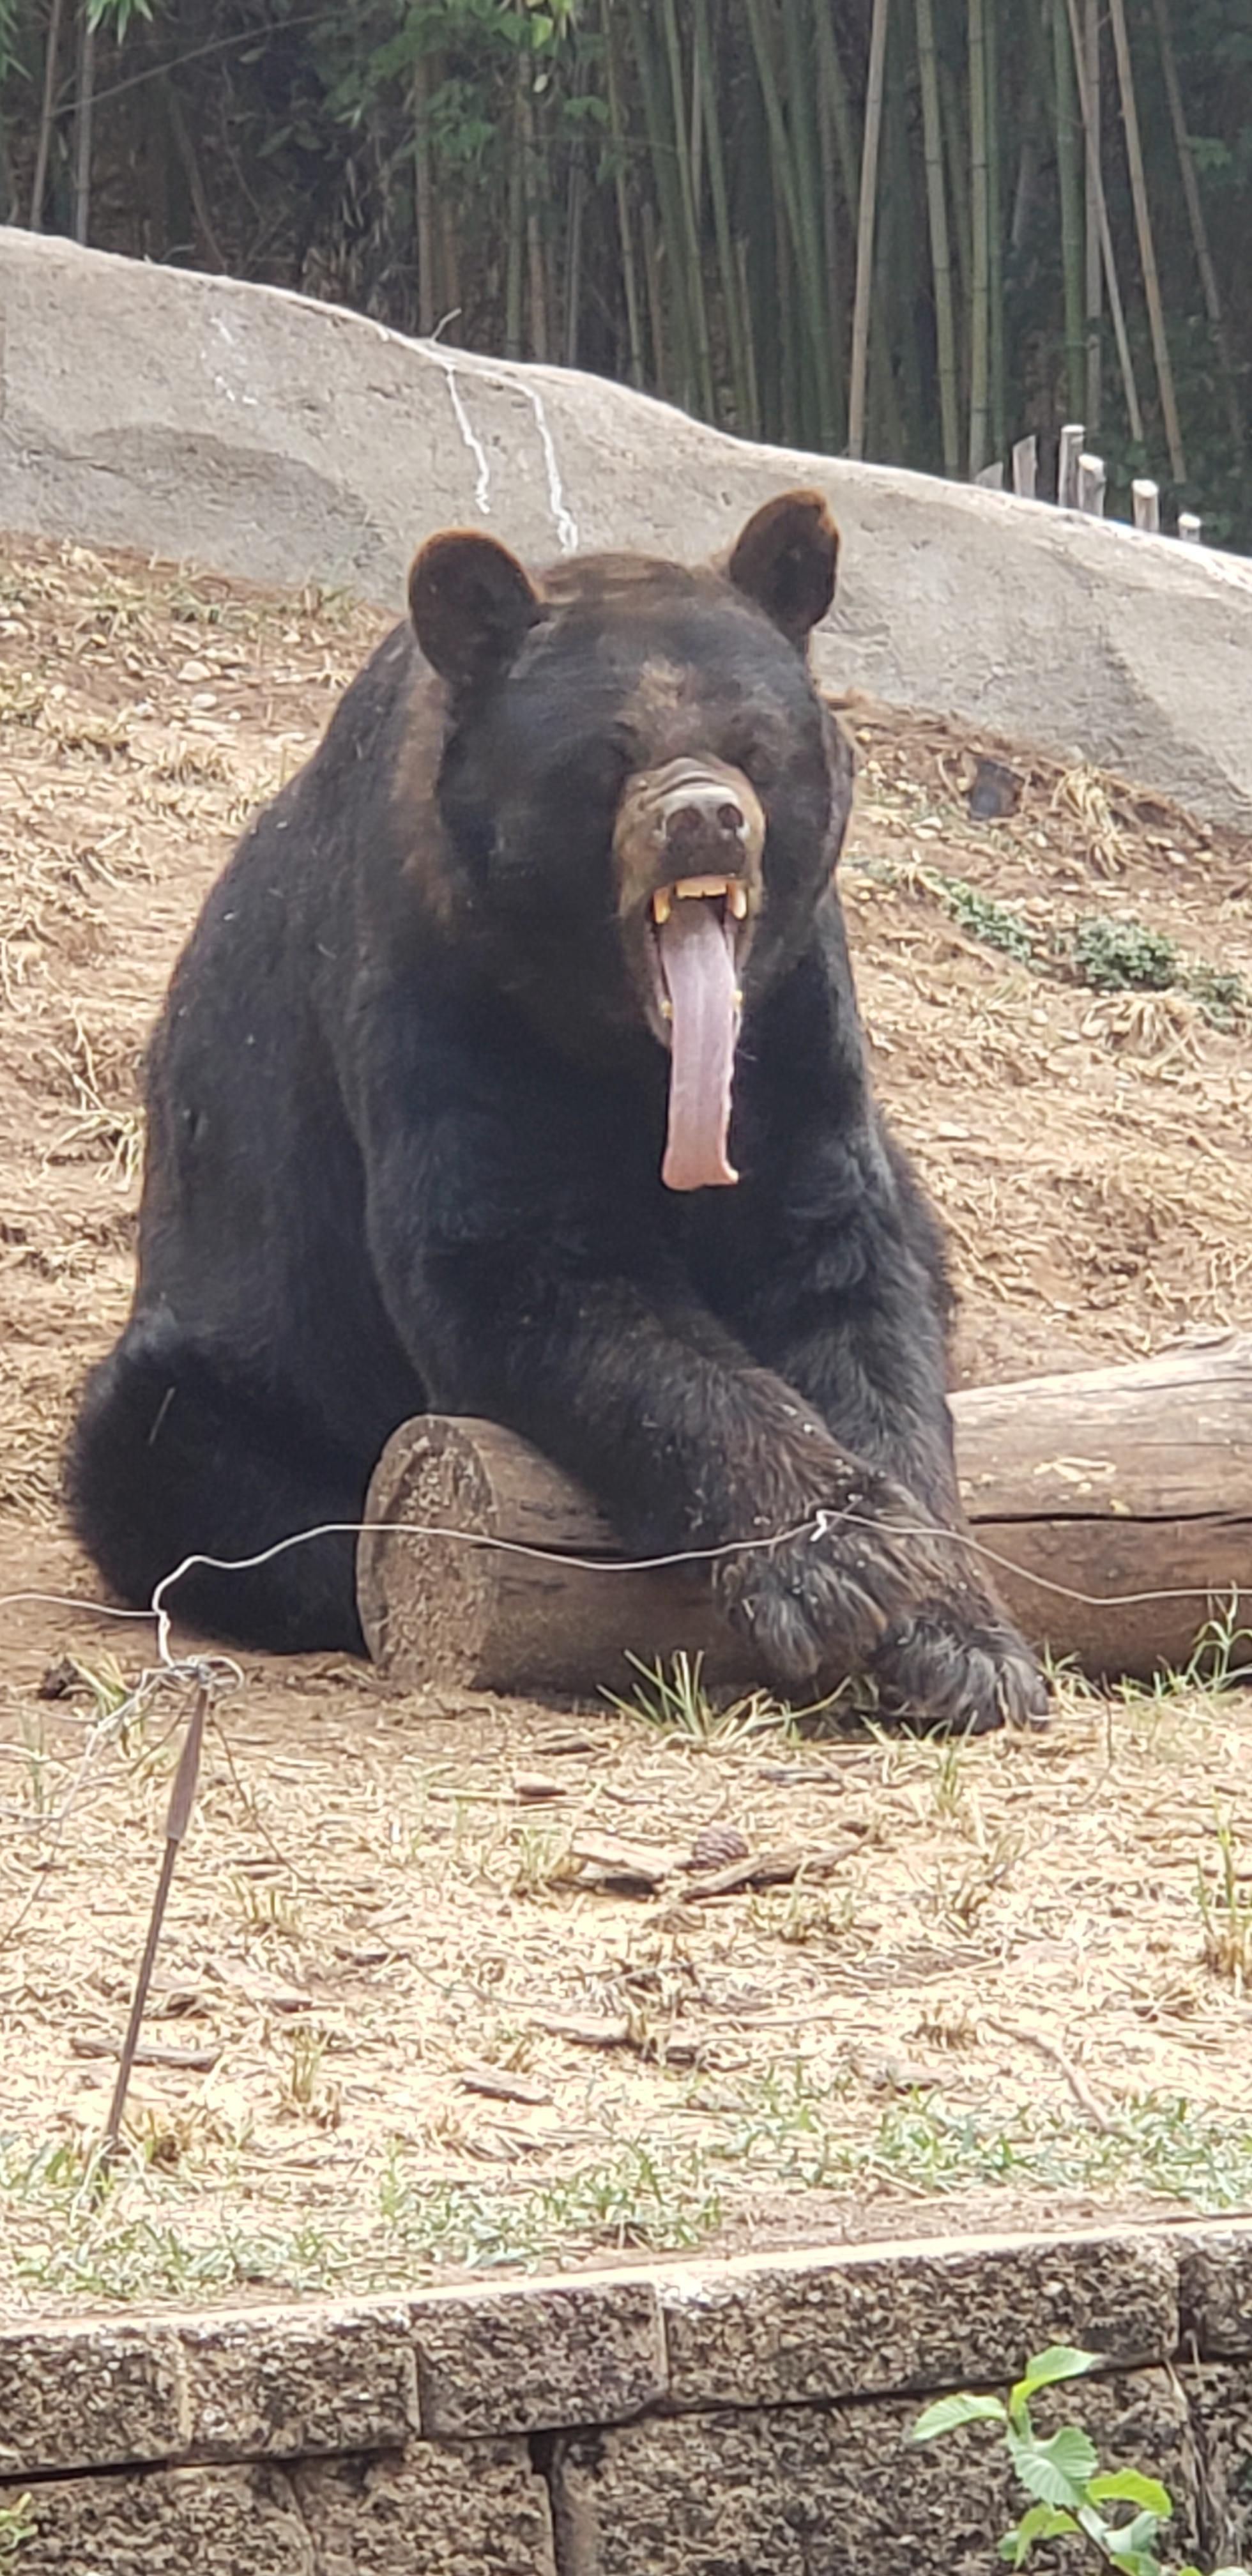 This bear at the zoo just had his tongue sticking out and I laughed way too hard